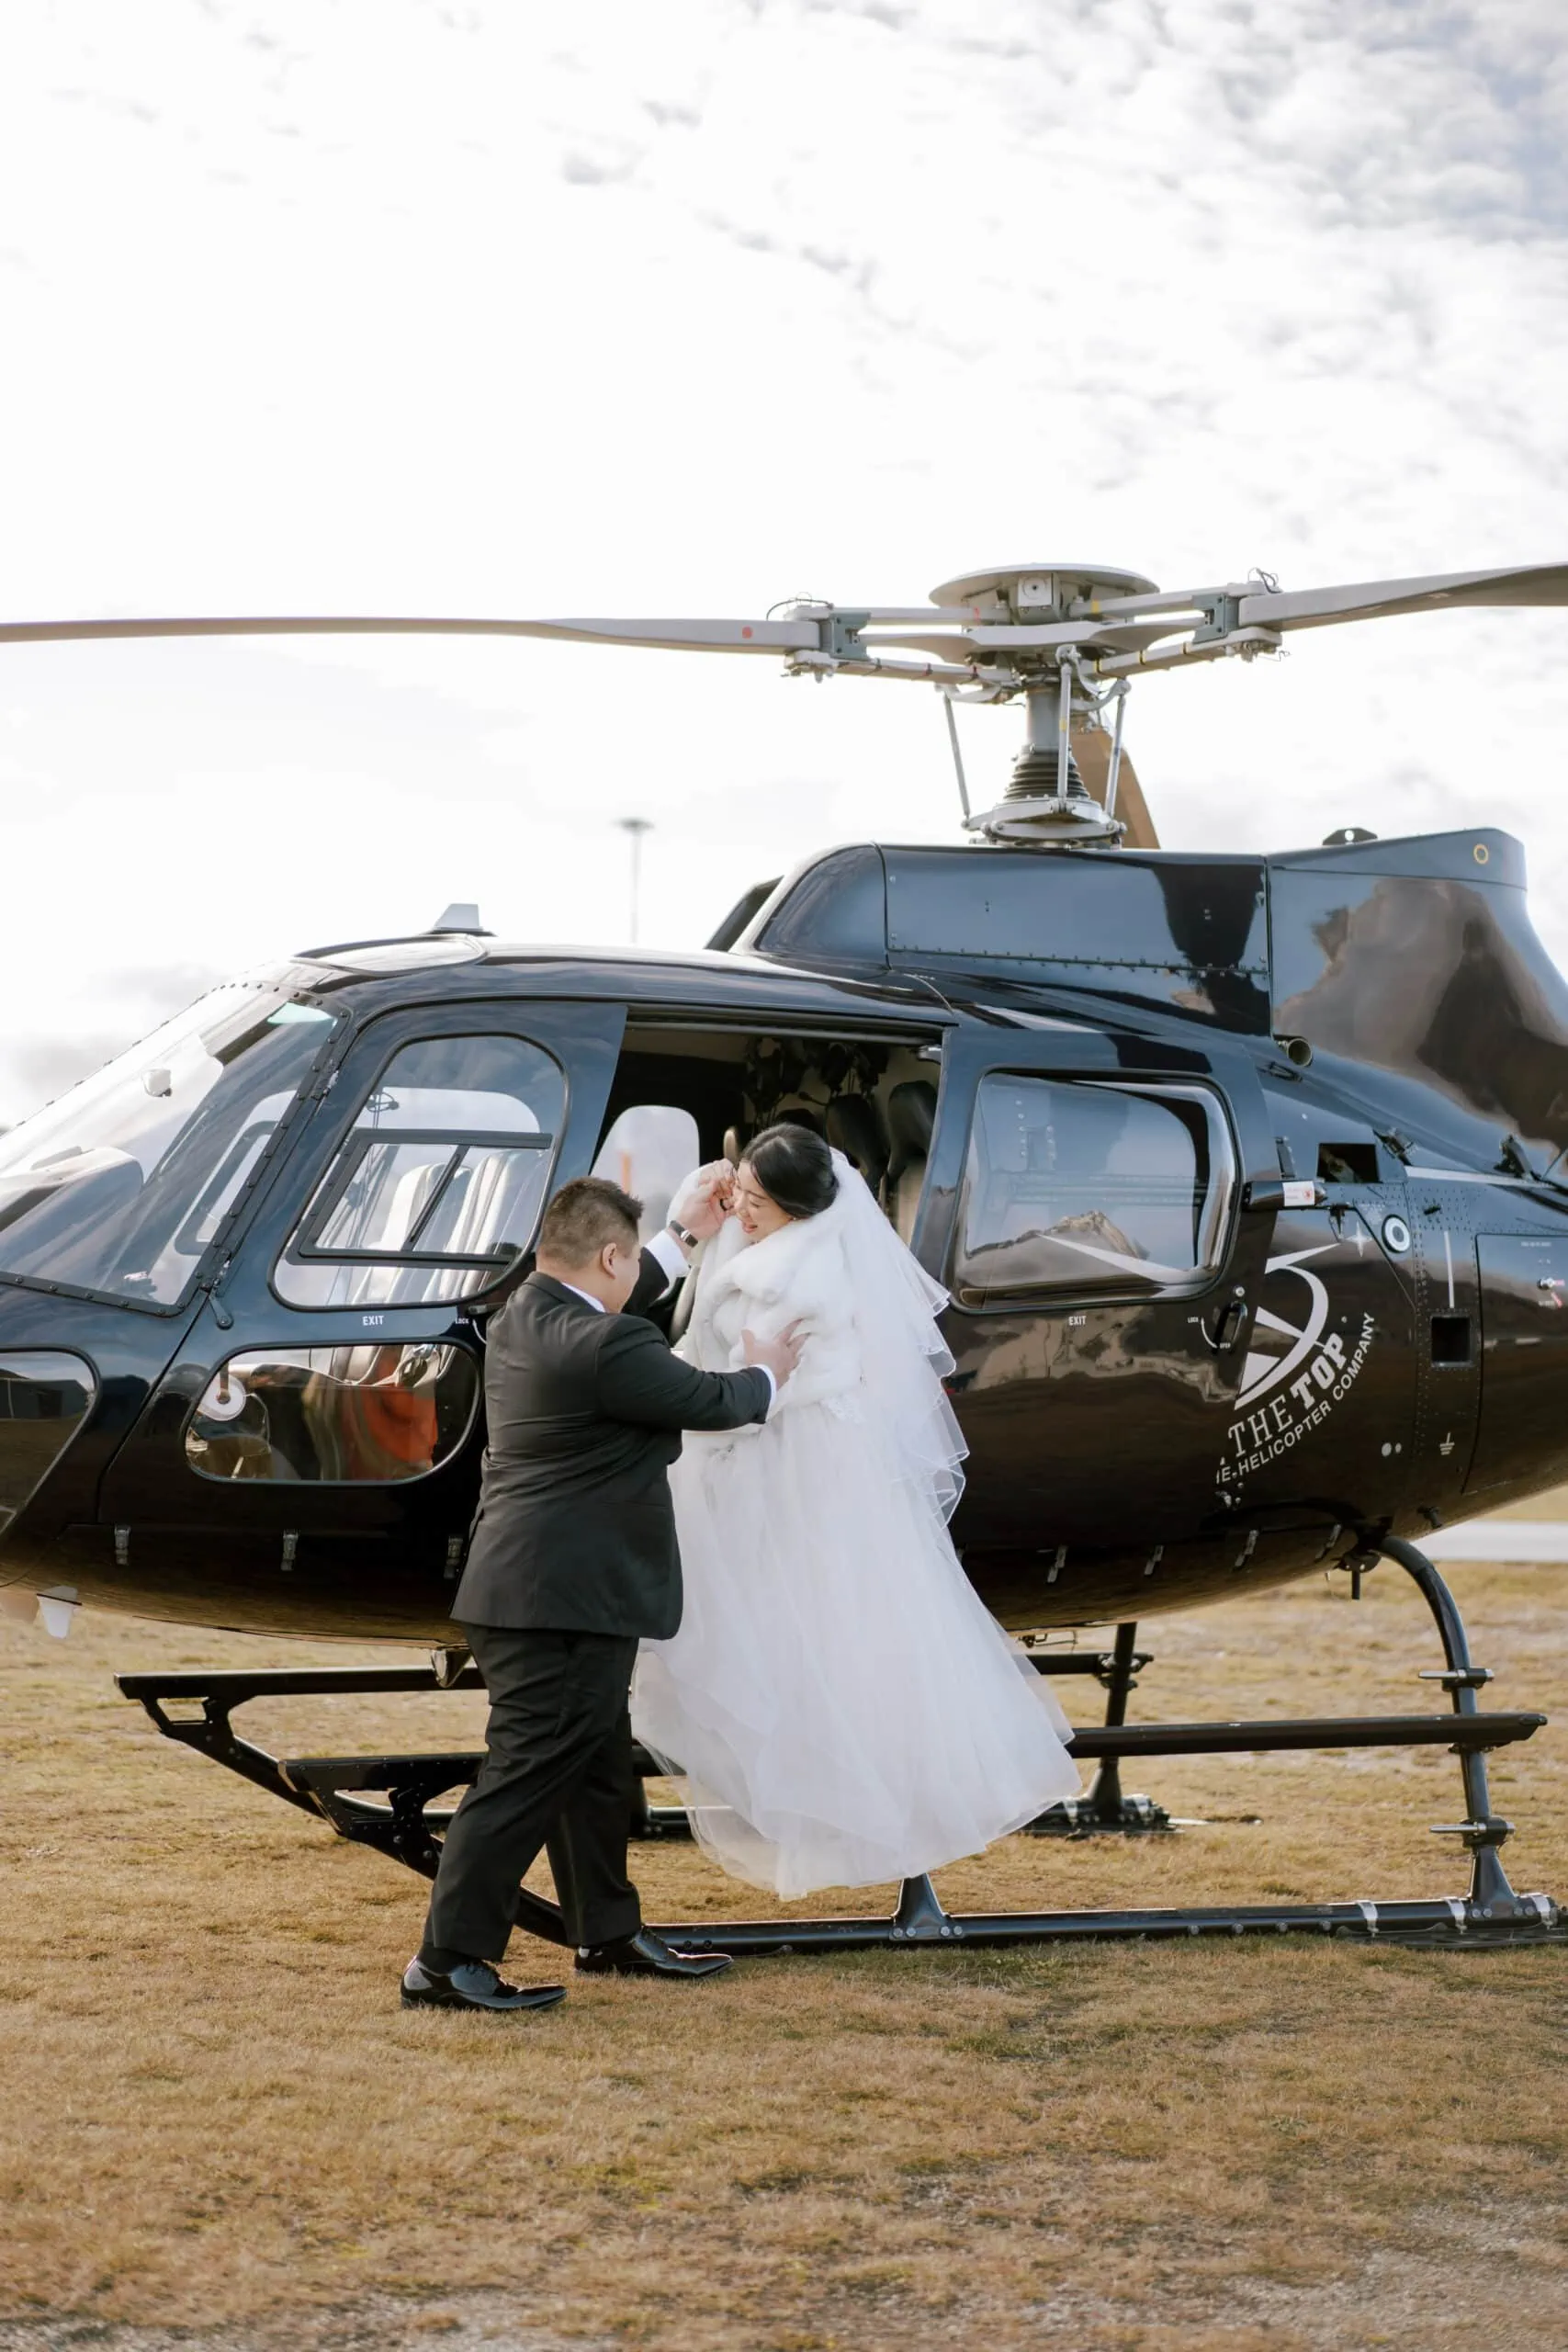 Queenstown New Zealand Elopement Wedding Photographer - Lam and Wendy's Kamana Lakehouse Wedding with a thrilling Heli Shoot.